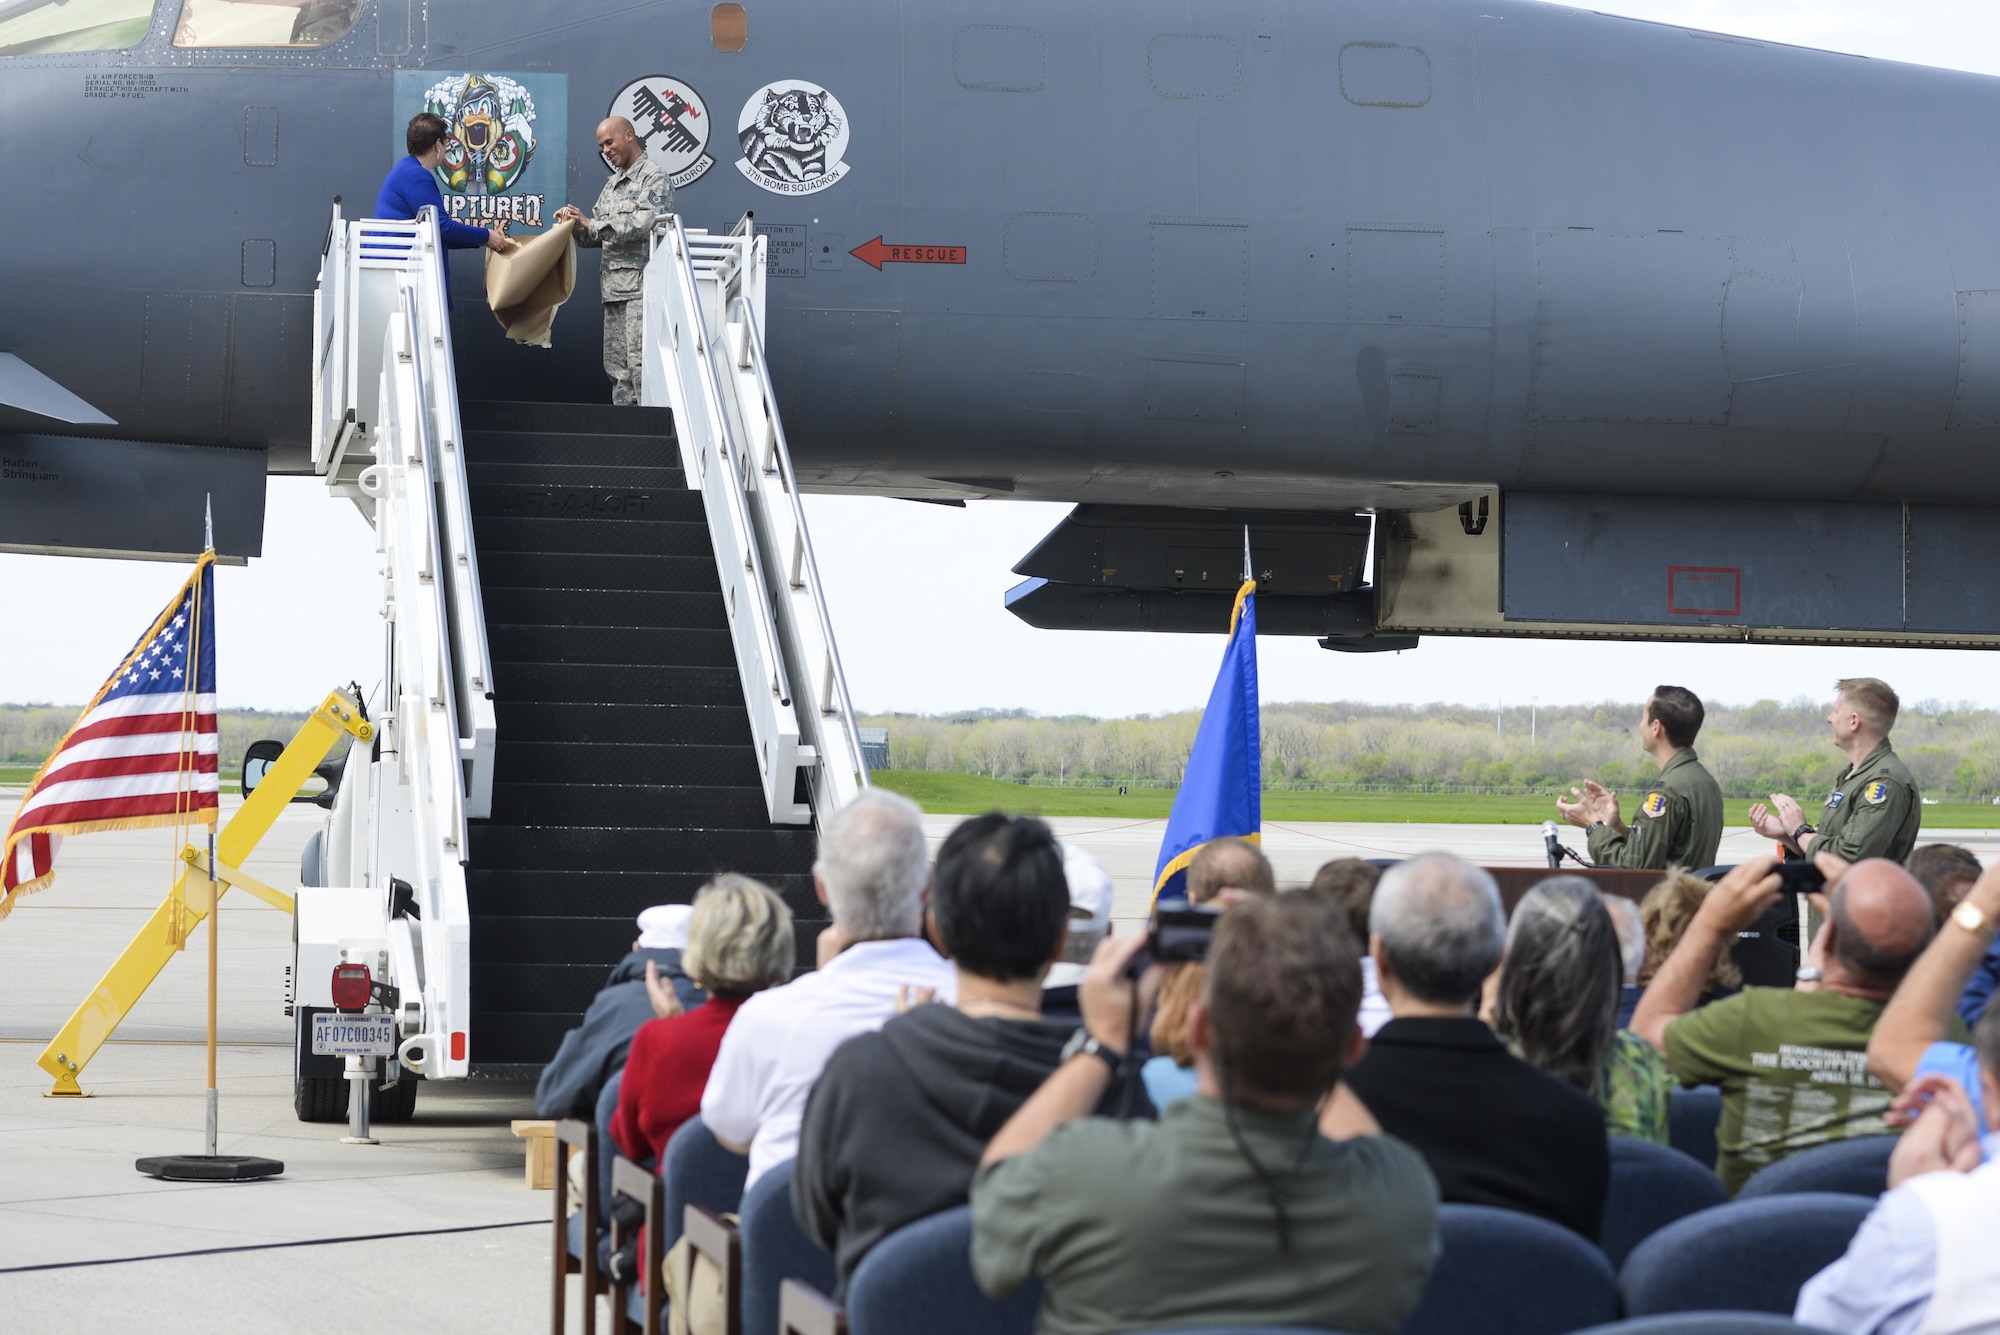 Becky Thatcher, daughter of the late Doolittle Raider Staff Sgt. David Thatcher, and U.S. Air Force Tech. Sgt. William Hatten, 28th Maintenance Squadron from Ellsworth Air Force Base, S.D., Ruptured Duck dedicated crew chief, unveil the newest rendition of the Ruptured Duck artwork in front of a crowd during a ceremony, Apr. 17, 2017 at Wright-Patterson Air Force Base, Ohio. The original artwork featured cross-eyed duck, wearing a leather helmet, staring out over crossed crutches. (U.S. Air Force photo by Wesley Farnsworth)